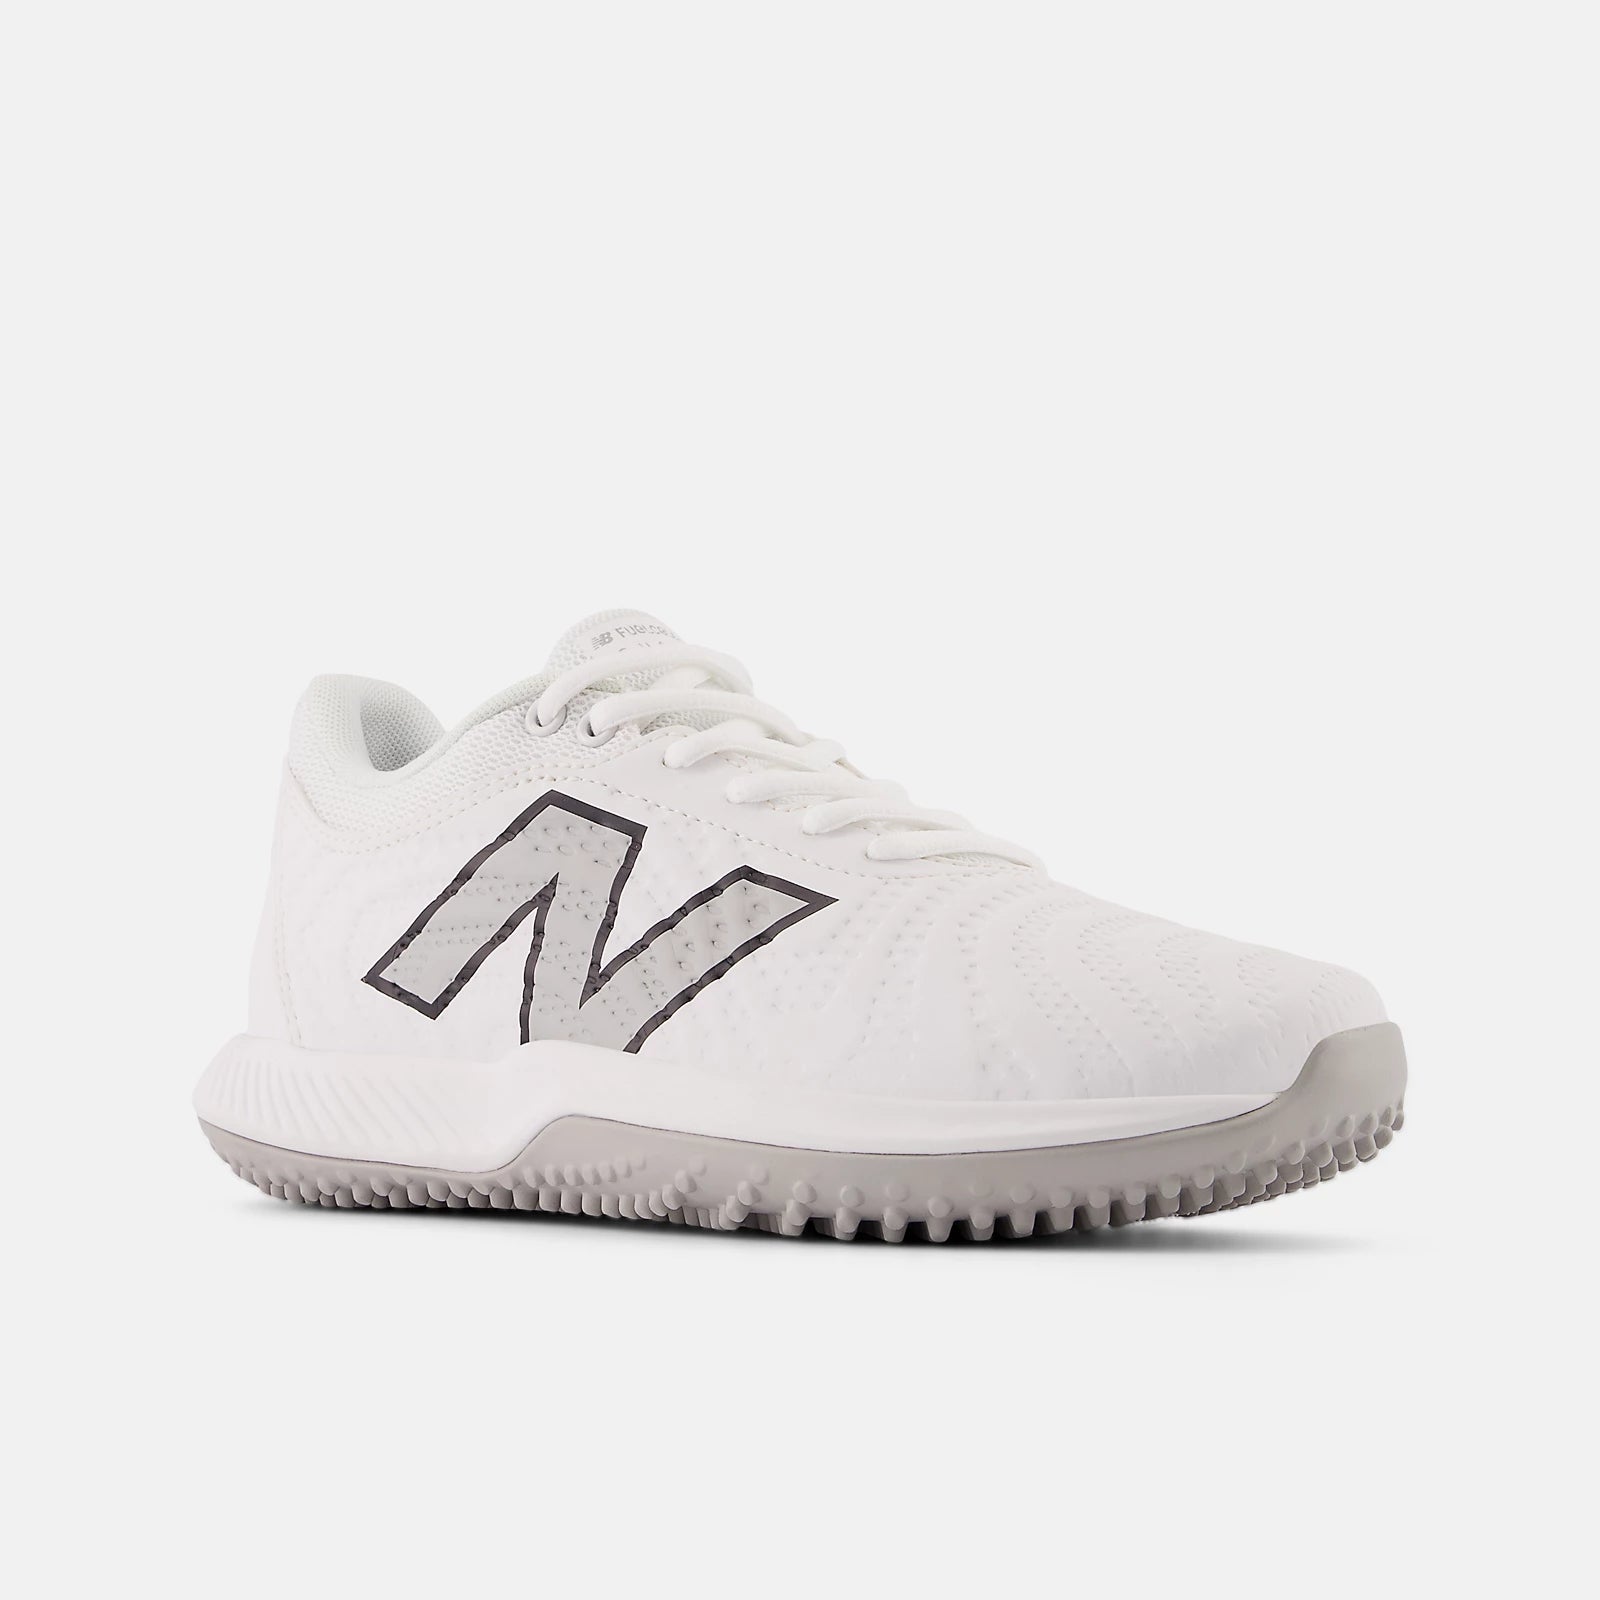 New Balance Women's White FuelCell FUSE v4 Turf Trainer: STFUSEW4